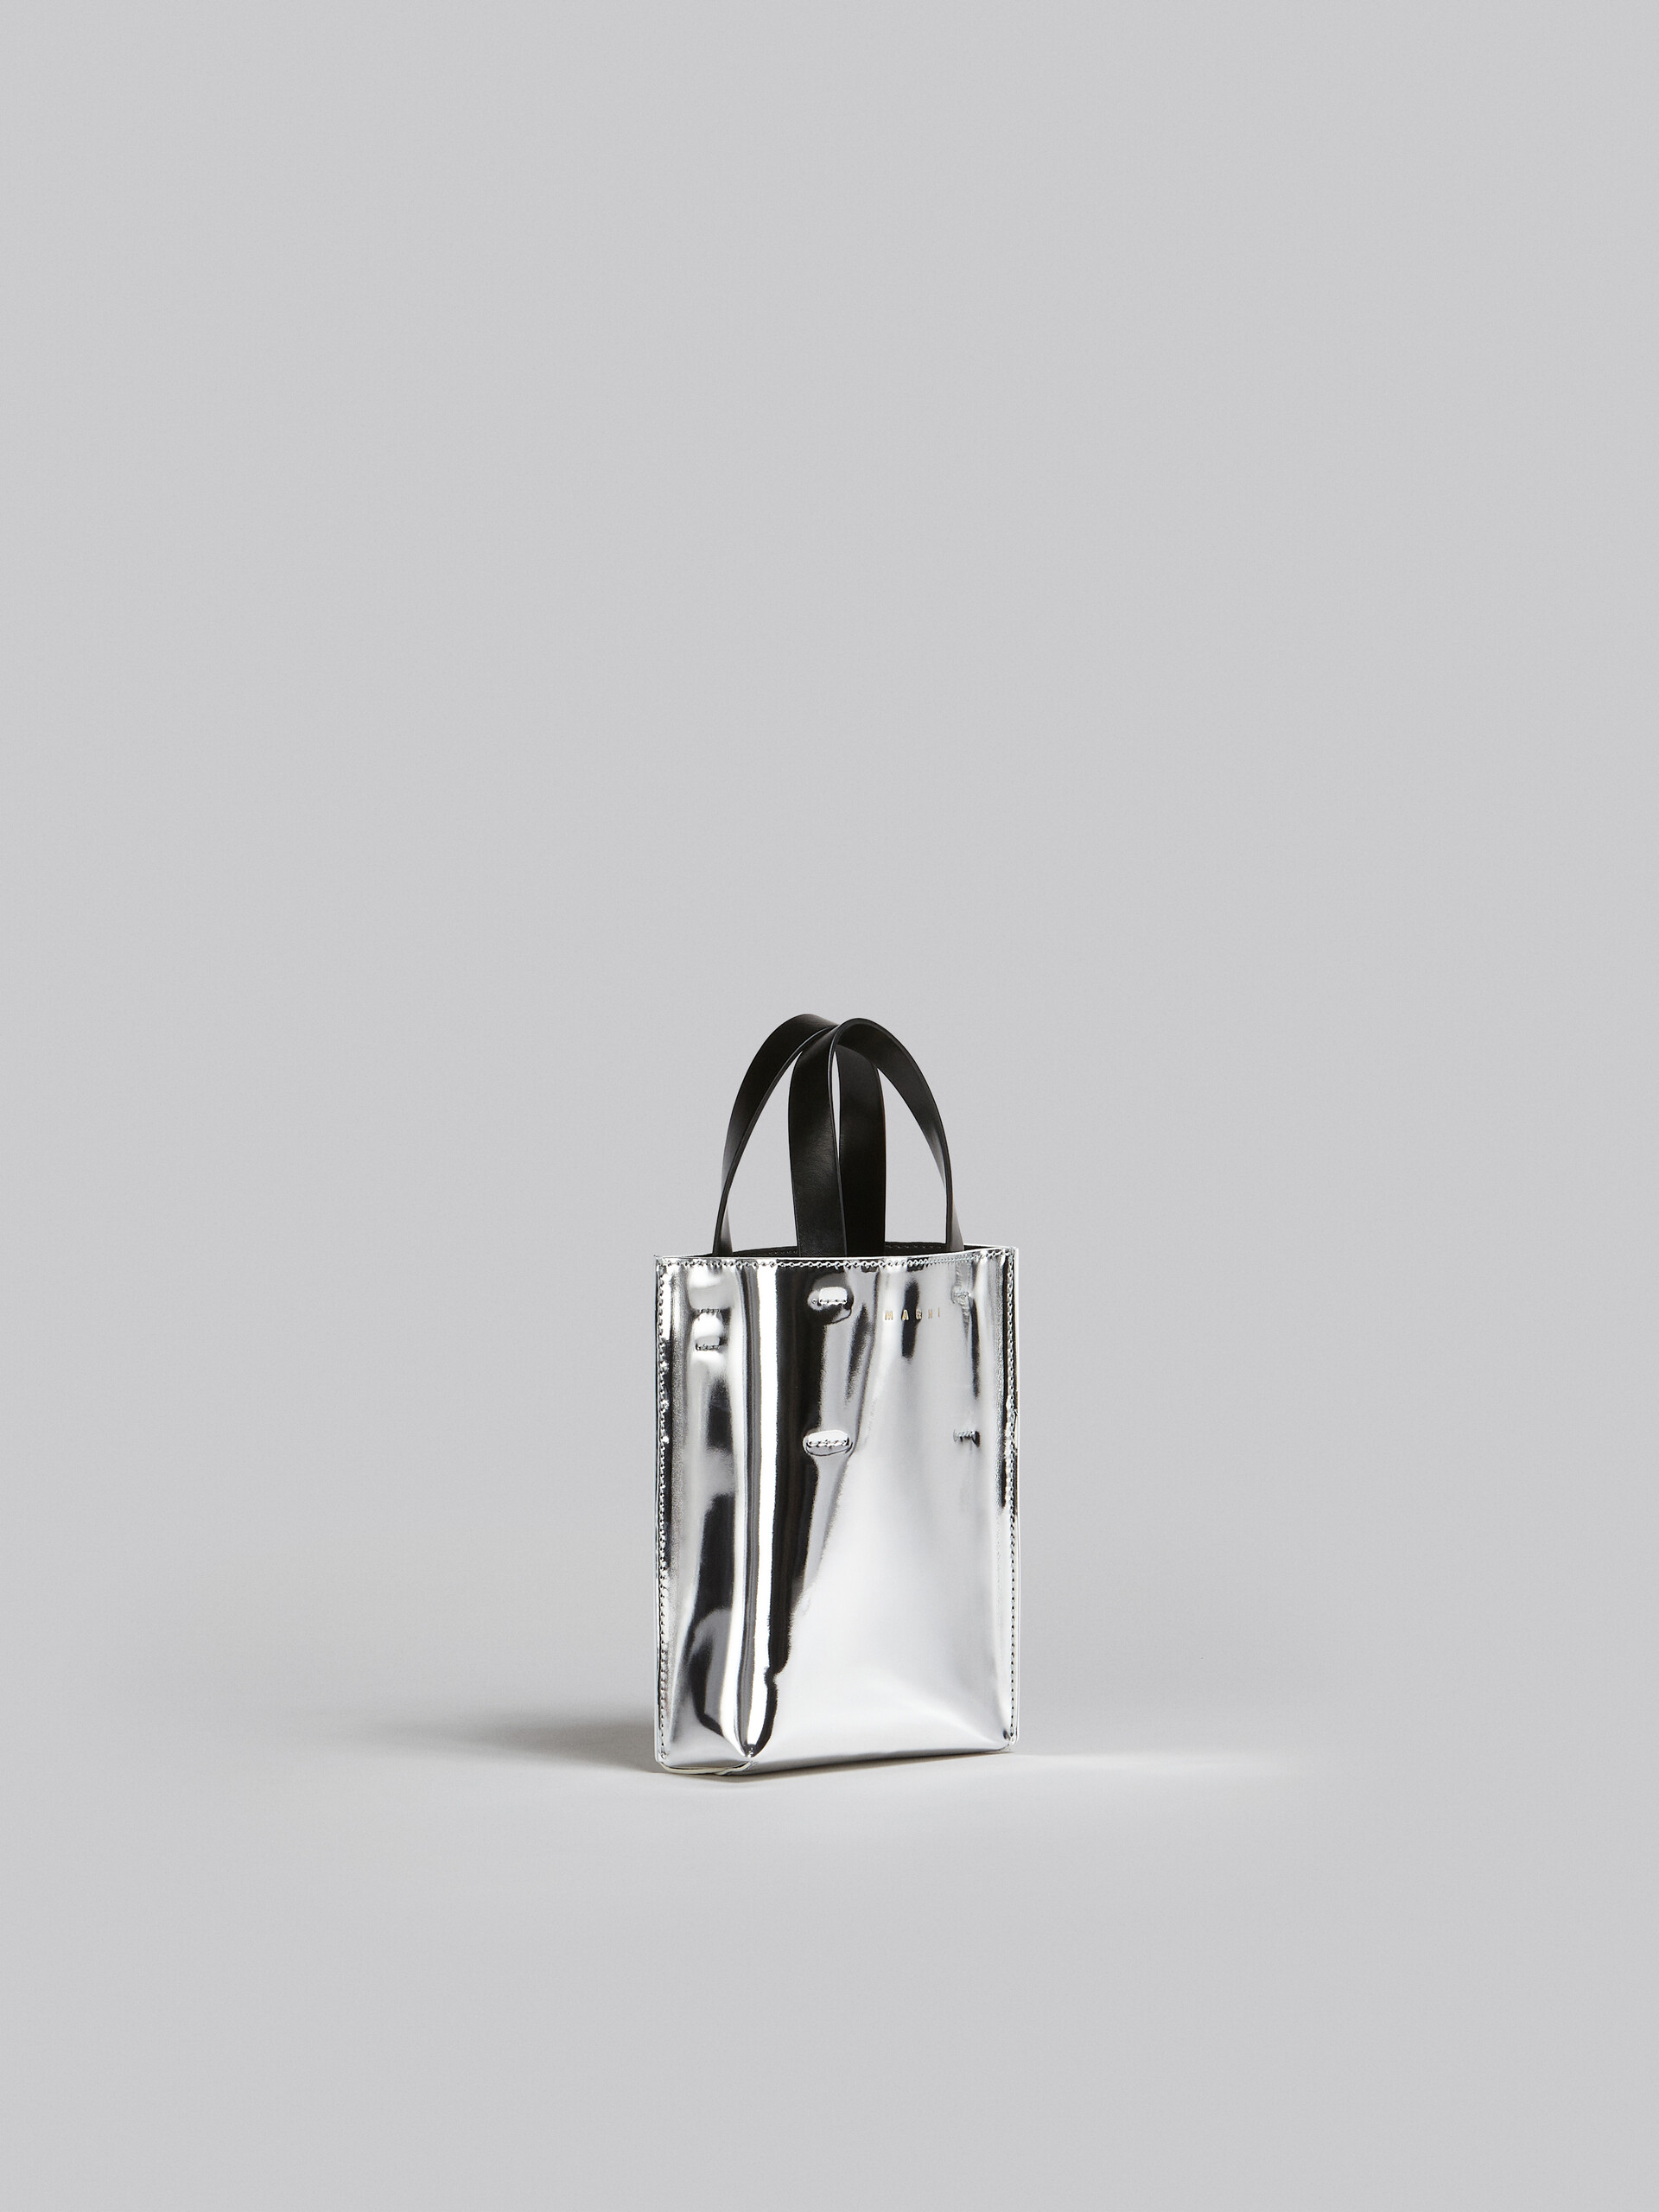 Museo Nano Bag in silver mirrored leather - Shopping Bags - Image 6